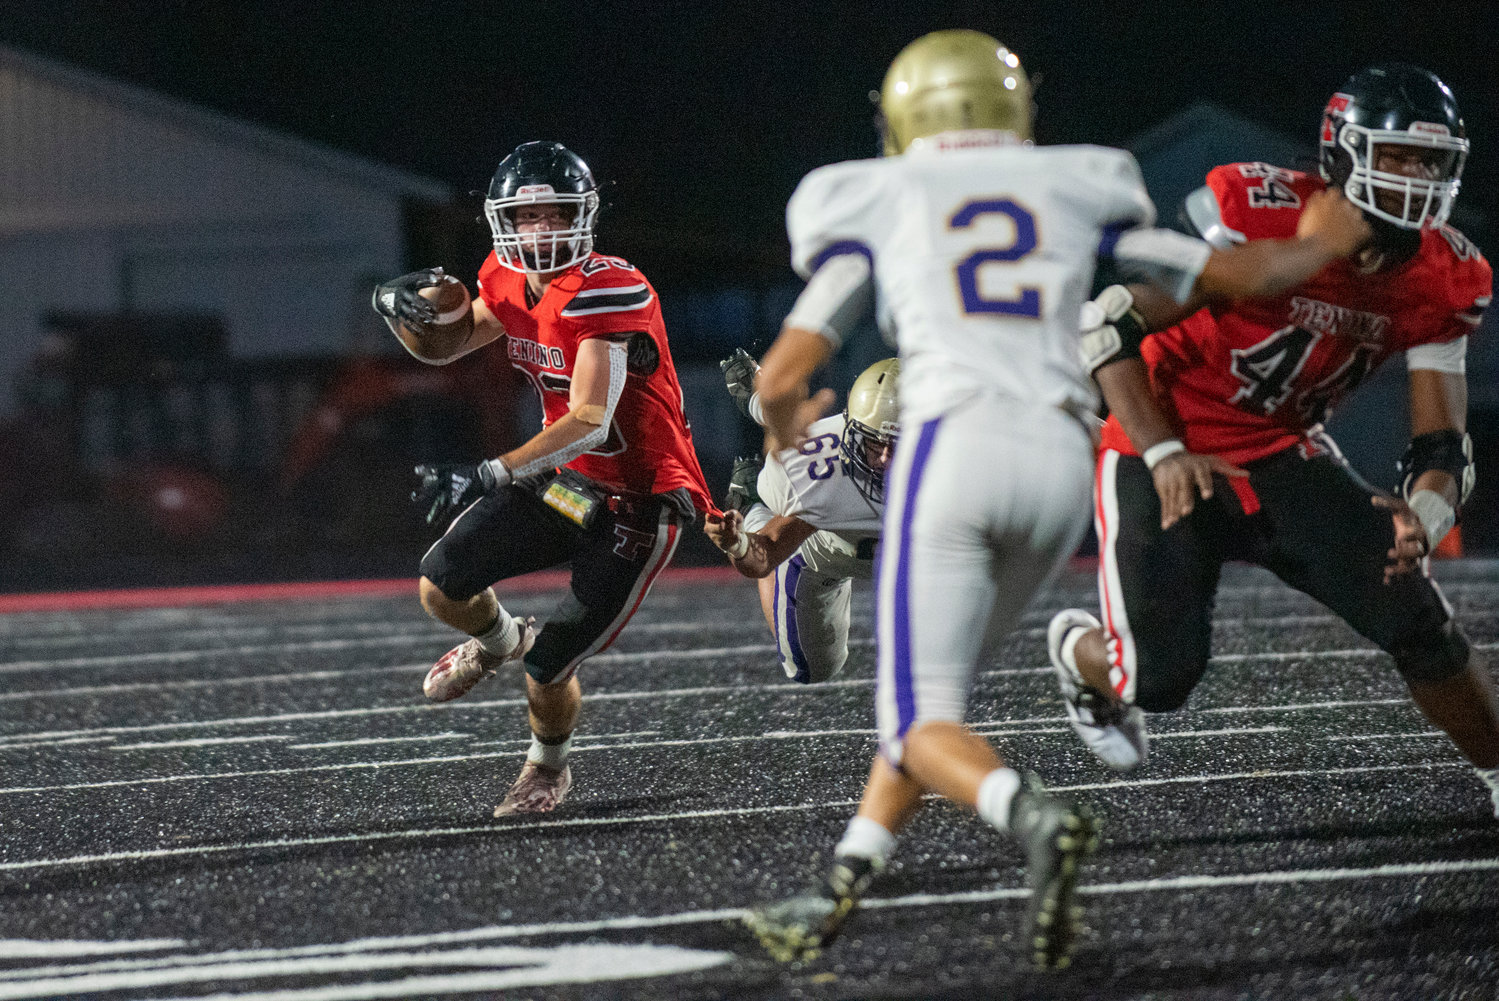 Tenino tailback Dylan Spicer (23) breaks free from Josue Roque's (65) grasp while rushing on Friday.